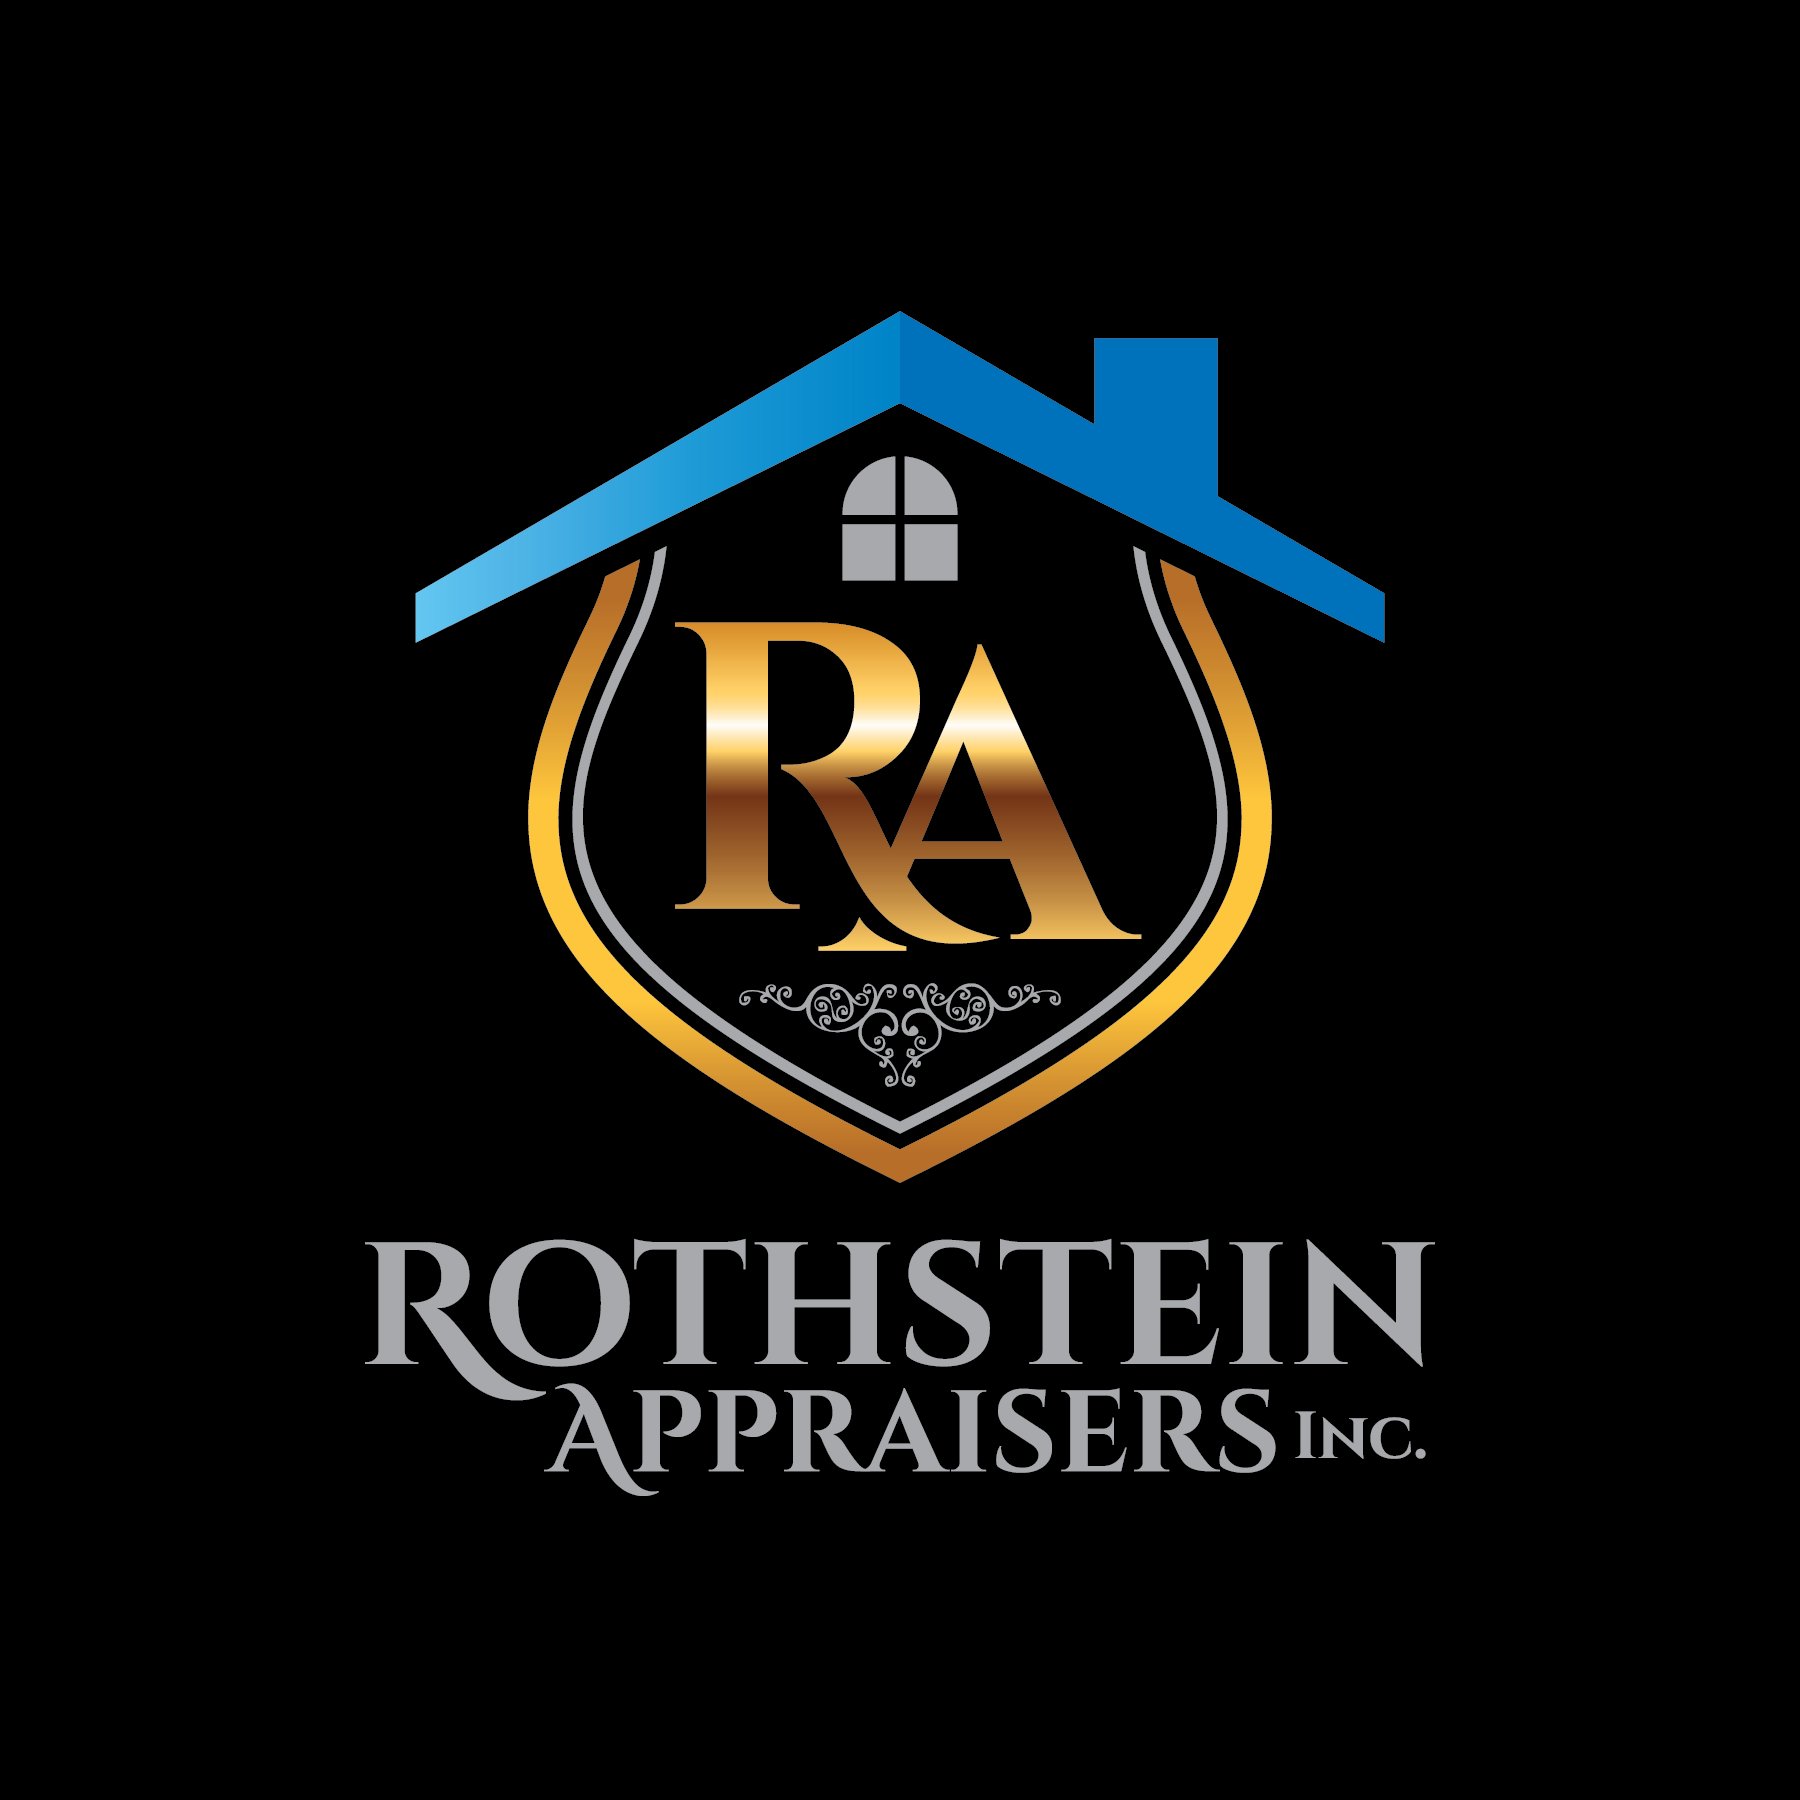 Marketing Director at Rothstein Appraisers Inc.  We're a Certified Residential Real Estate Appraisal Company in business since 198 Covering Manhattan to Montauk